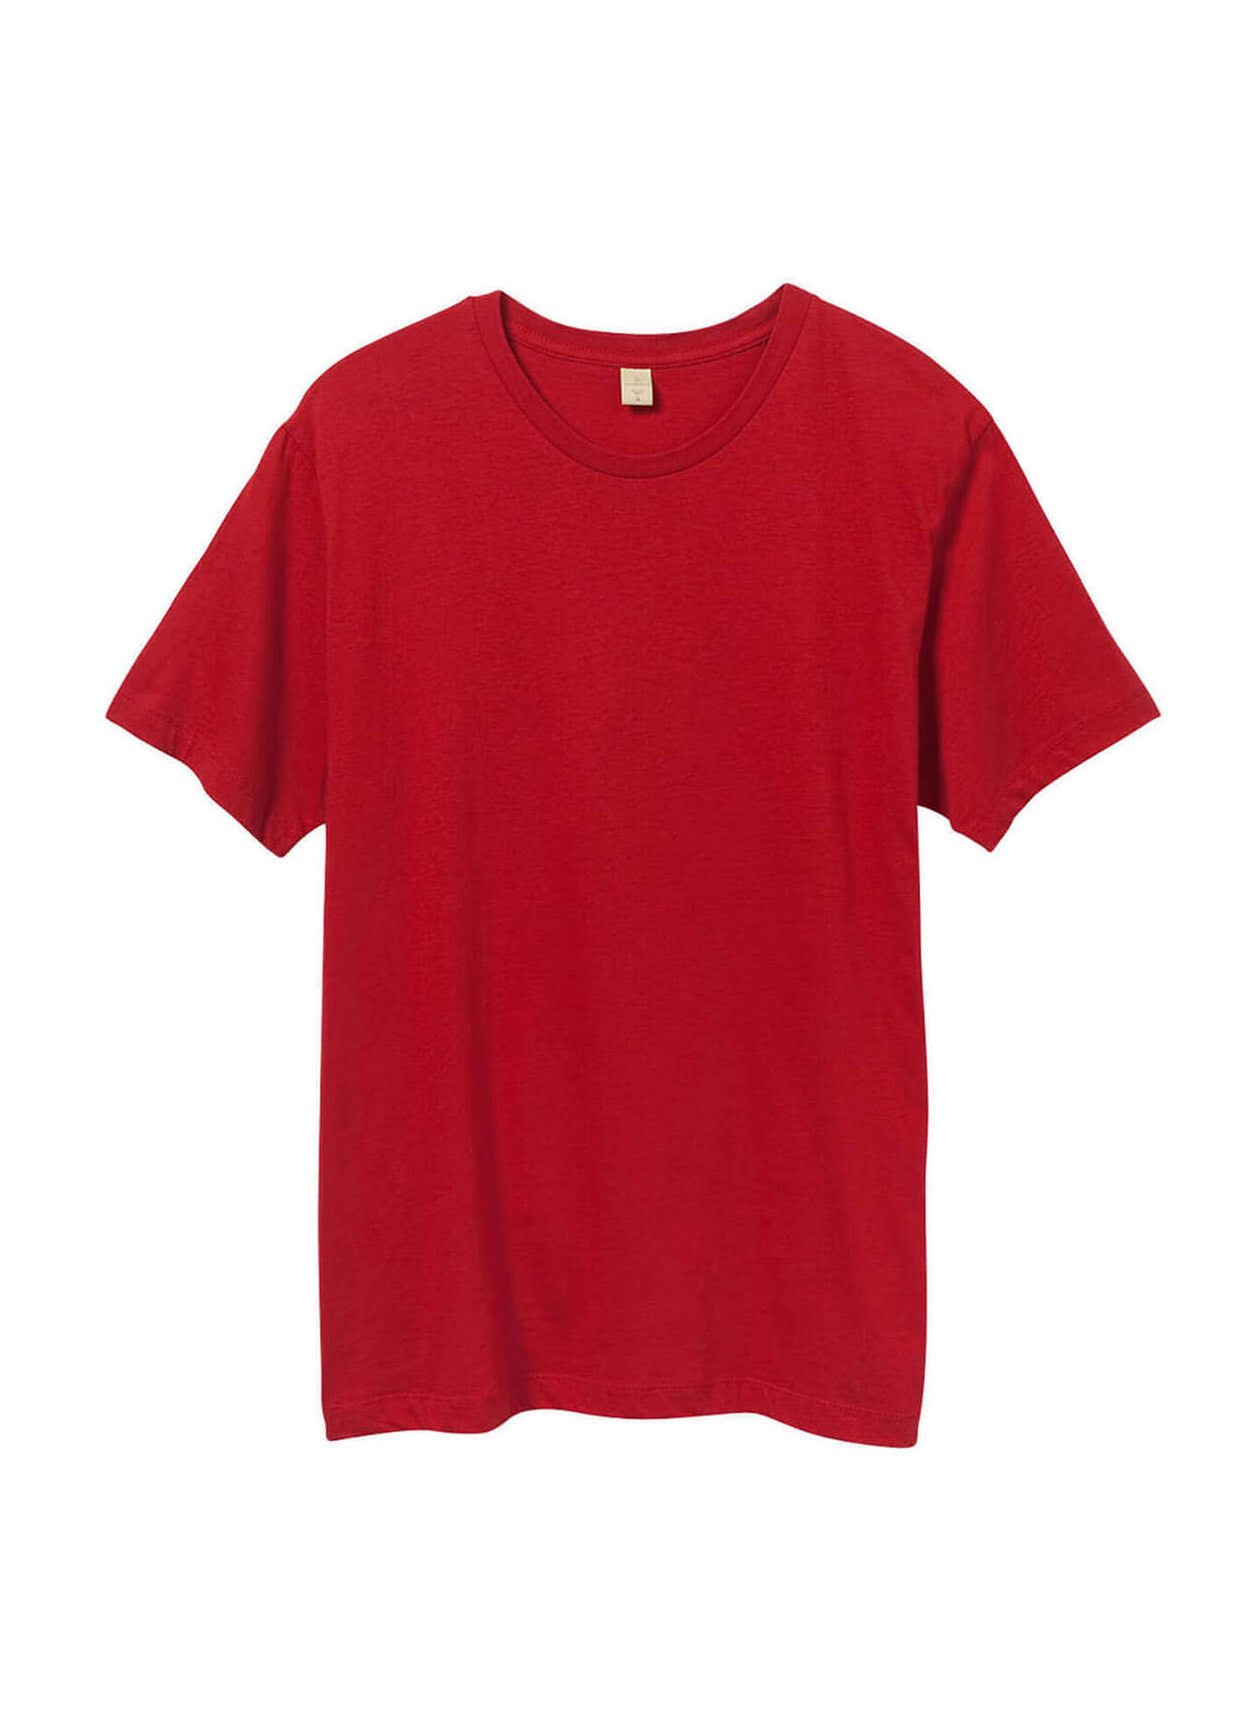  Alternative mens Go-to Tee T Shirt, Apple Red, X-Small US :  Clothing, Shoes & Jewelry